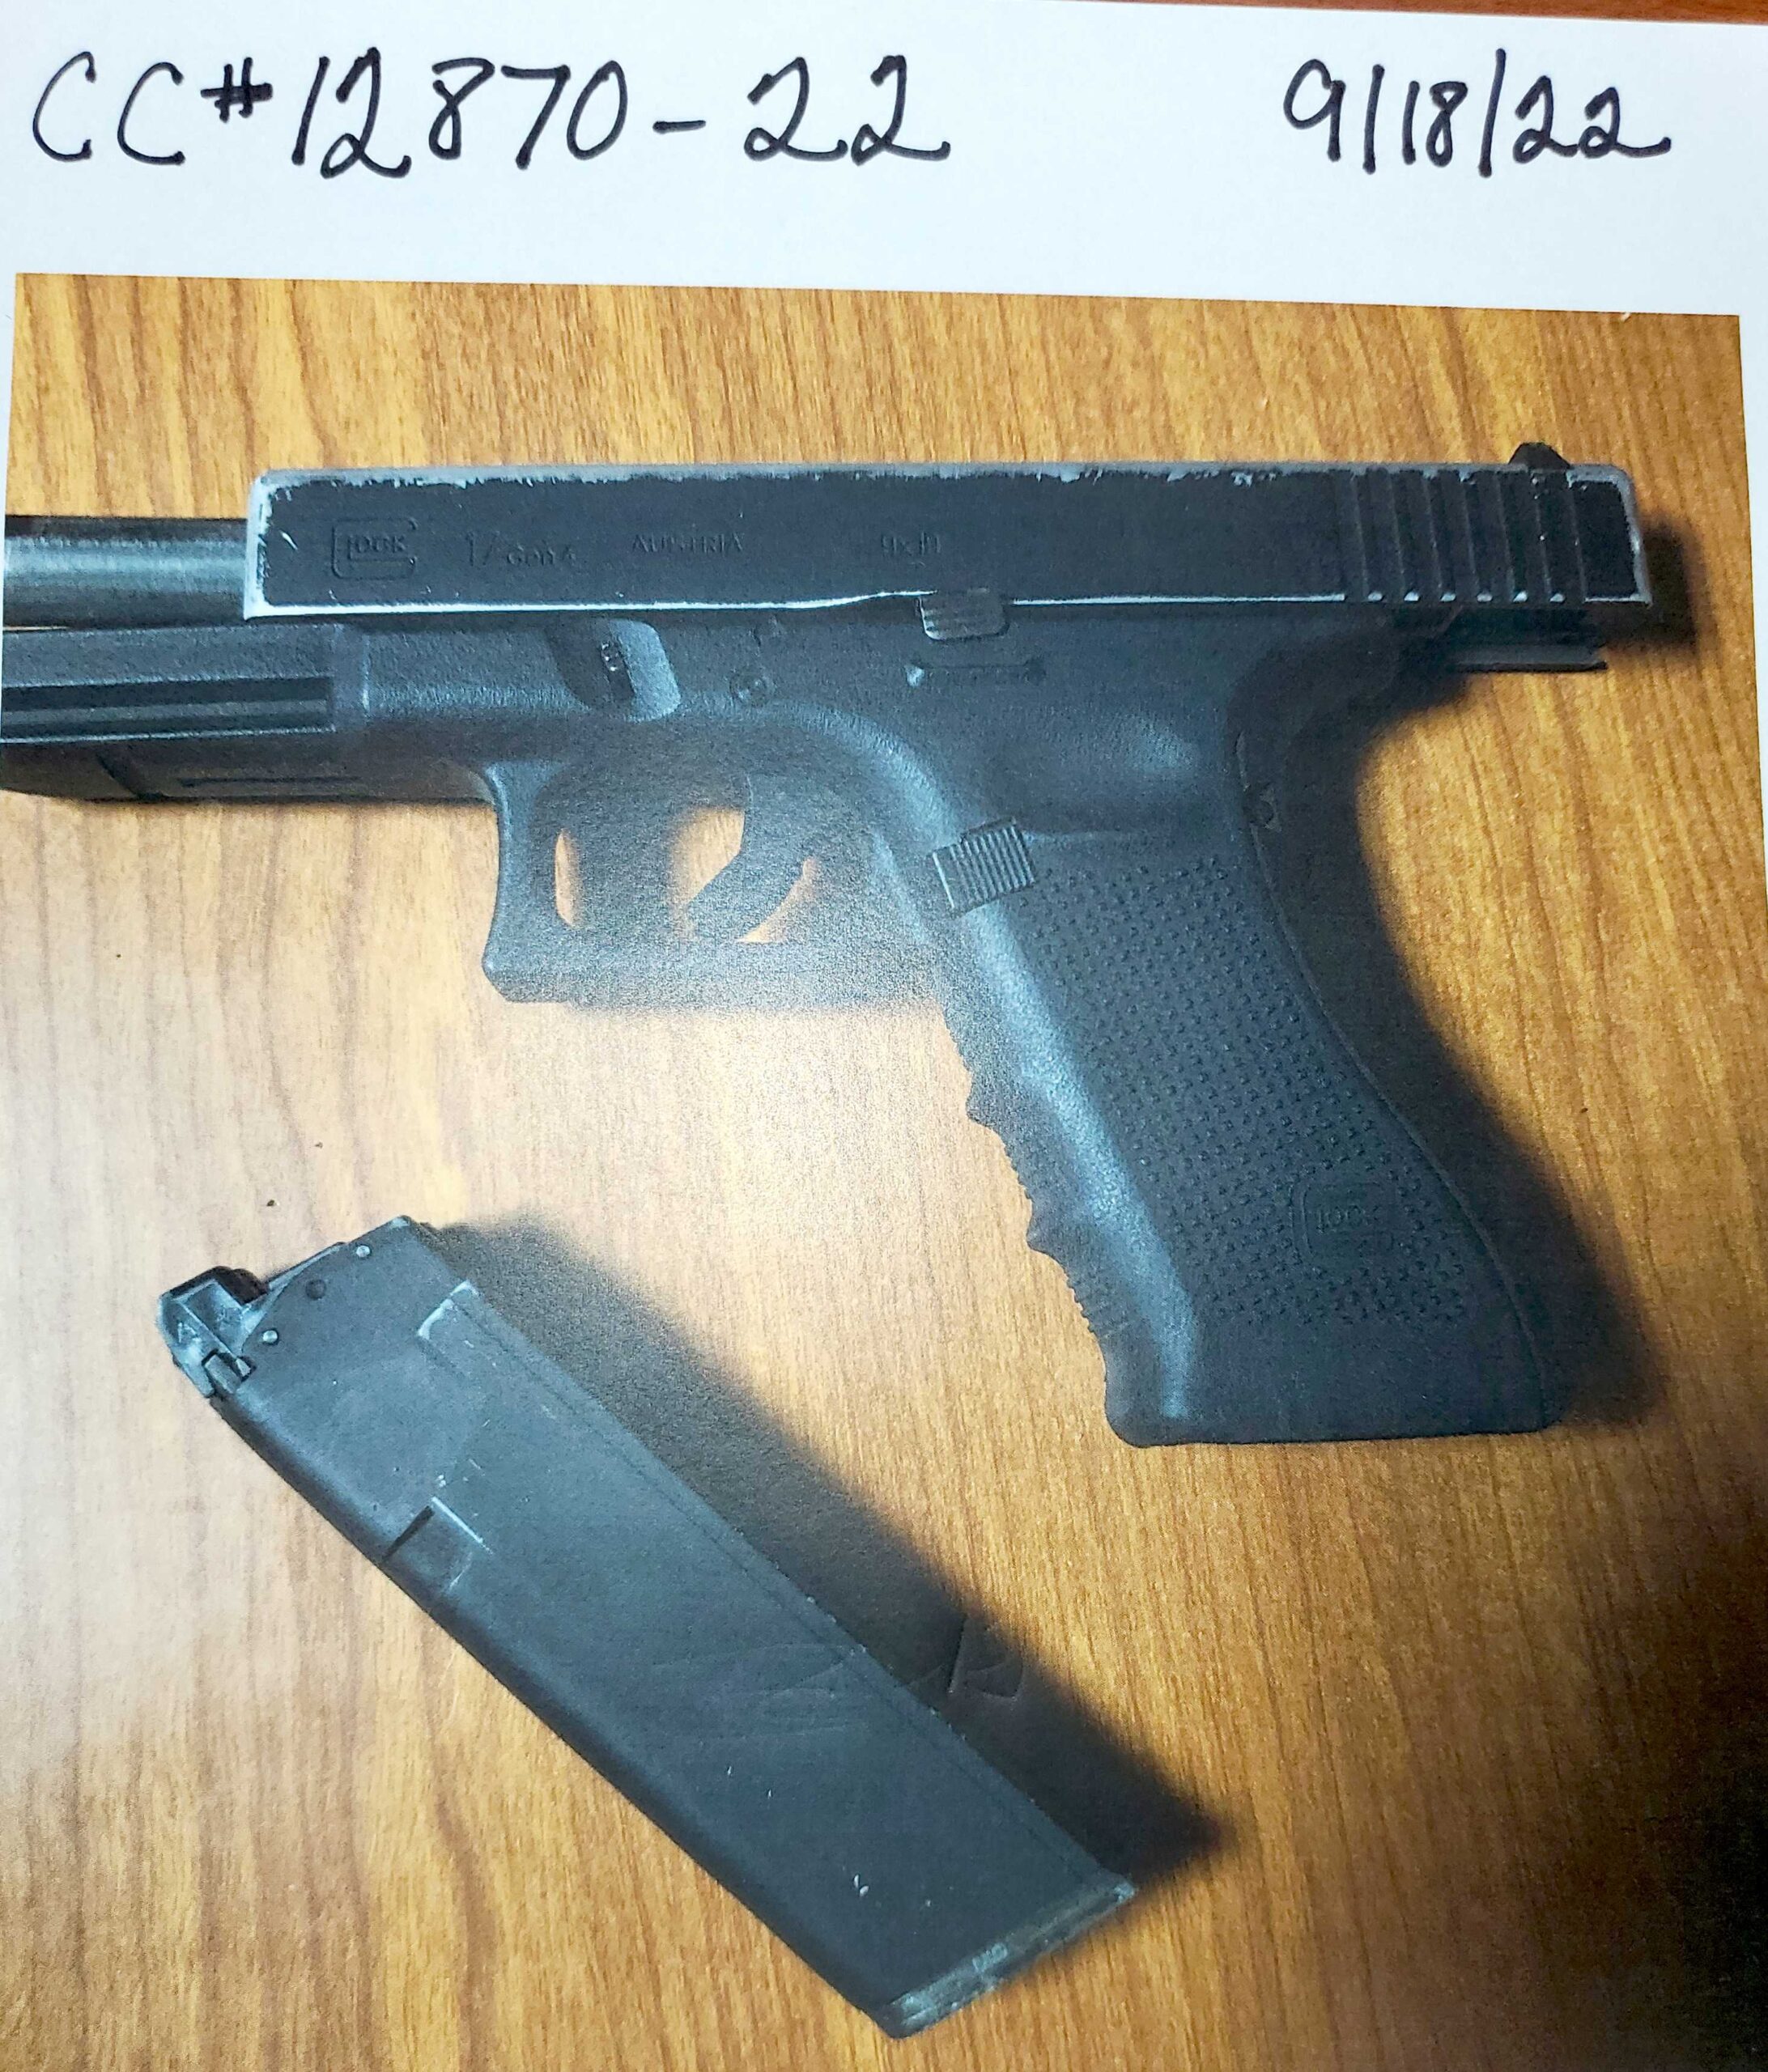 A replica of a Glock 17 handgun led to an arrest on charges of menacing and harassment for an area man.    COURTESY SOUTHAMPTON VILLAGE POLICE